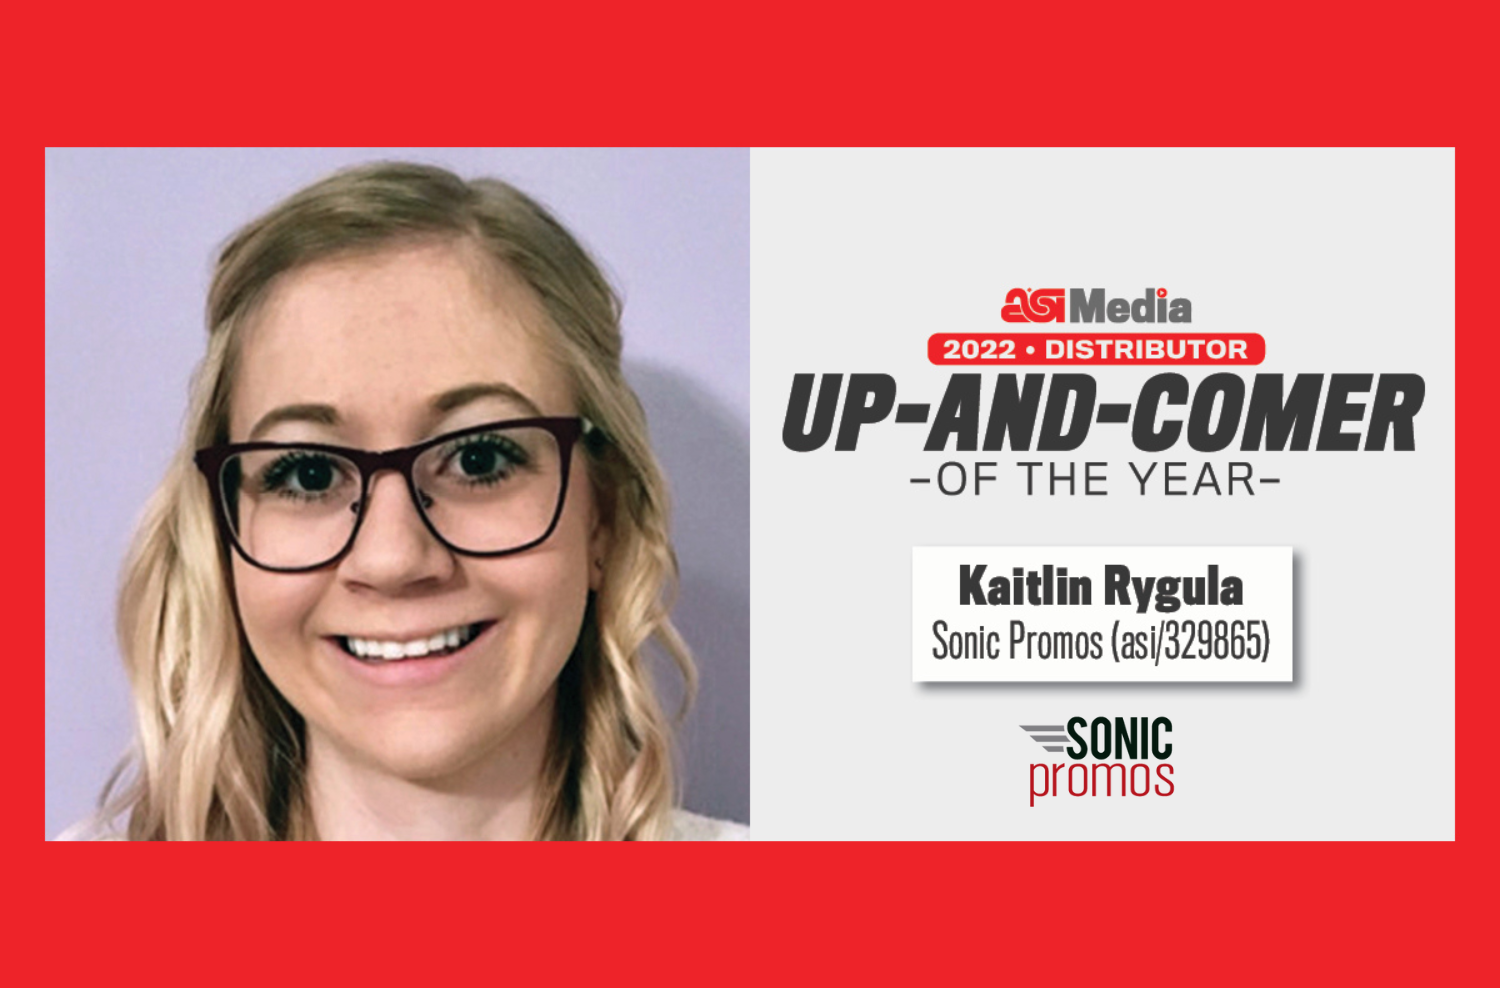 Press Release: Sonic Promos’ Kaitlyn Rygula Wins Industry “Up-and-Comer of the Year”